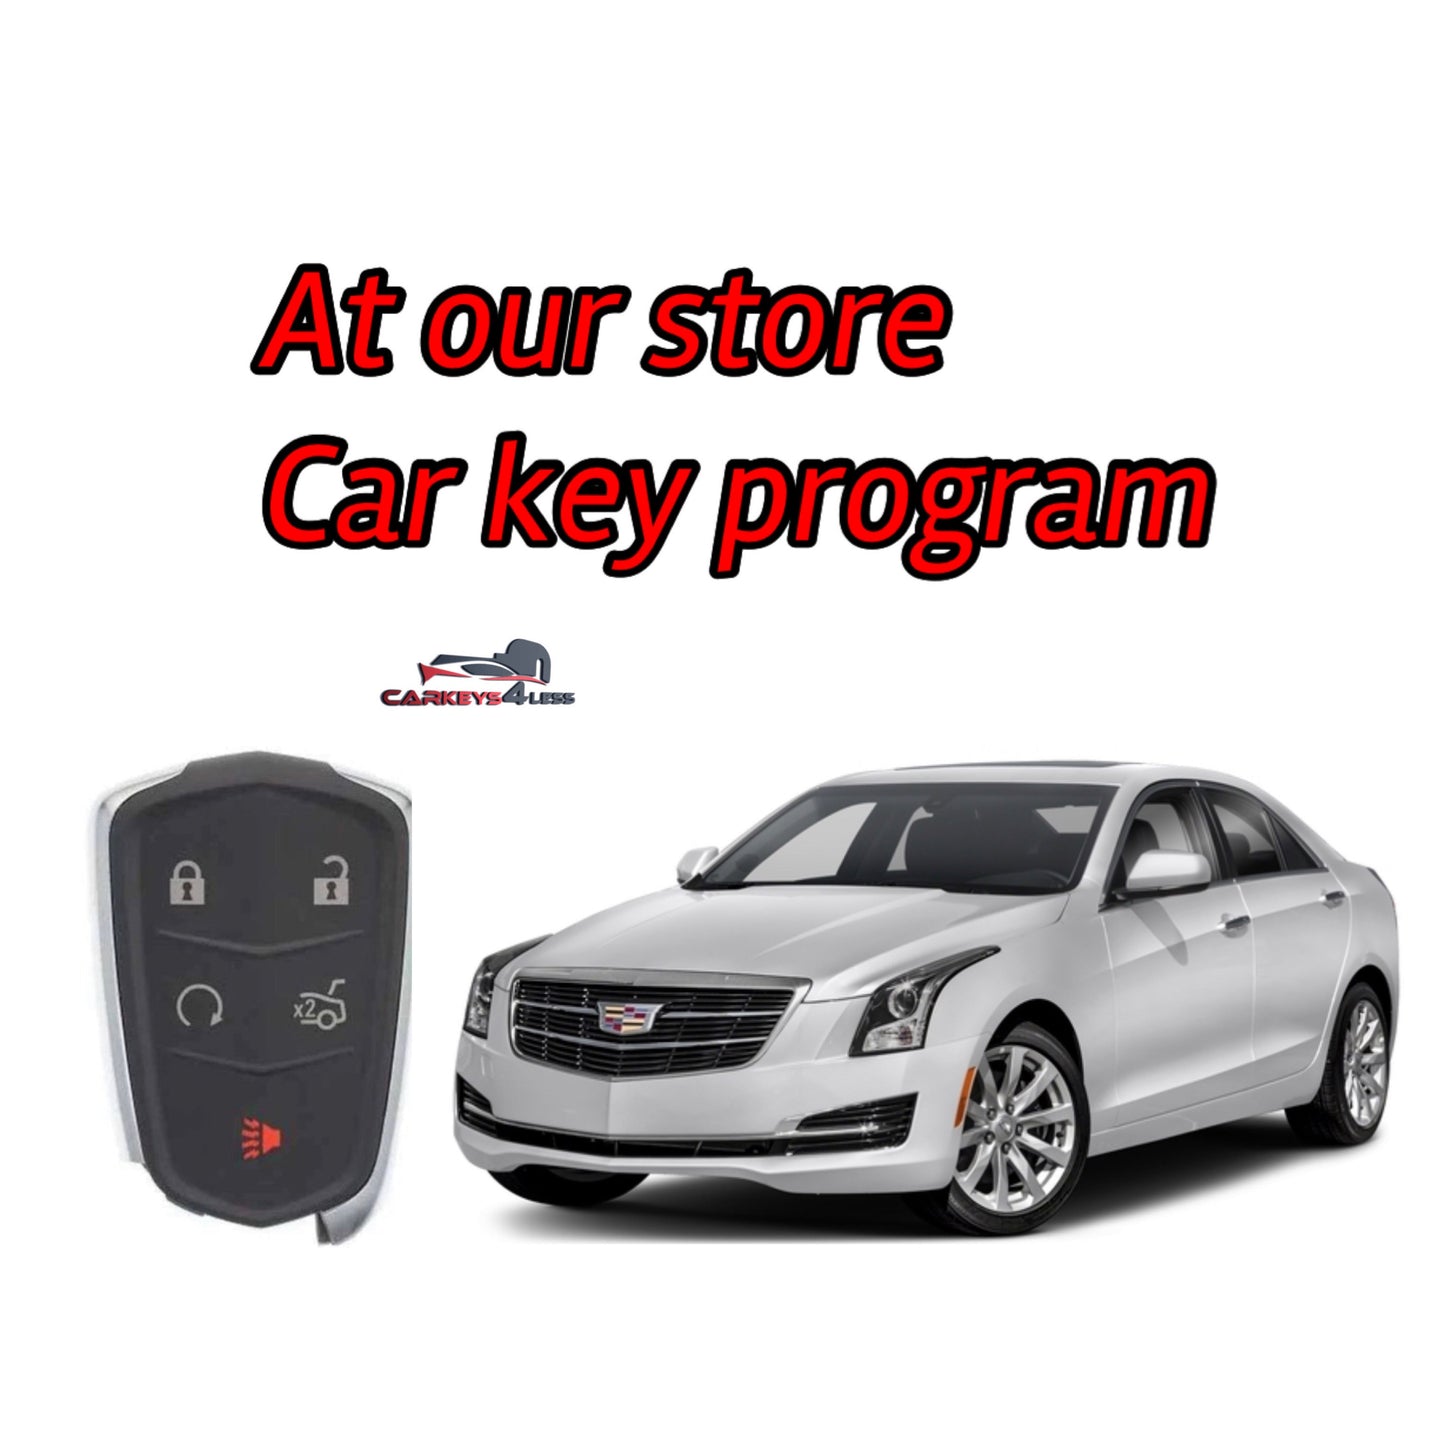 At our store car key replacement for Cadillac